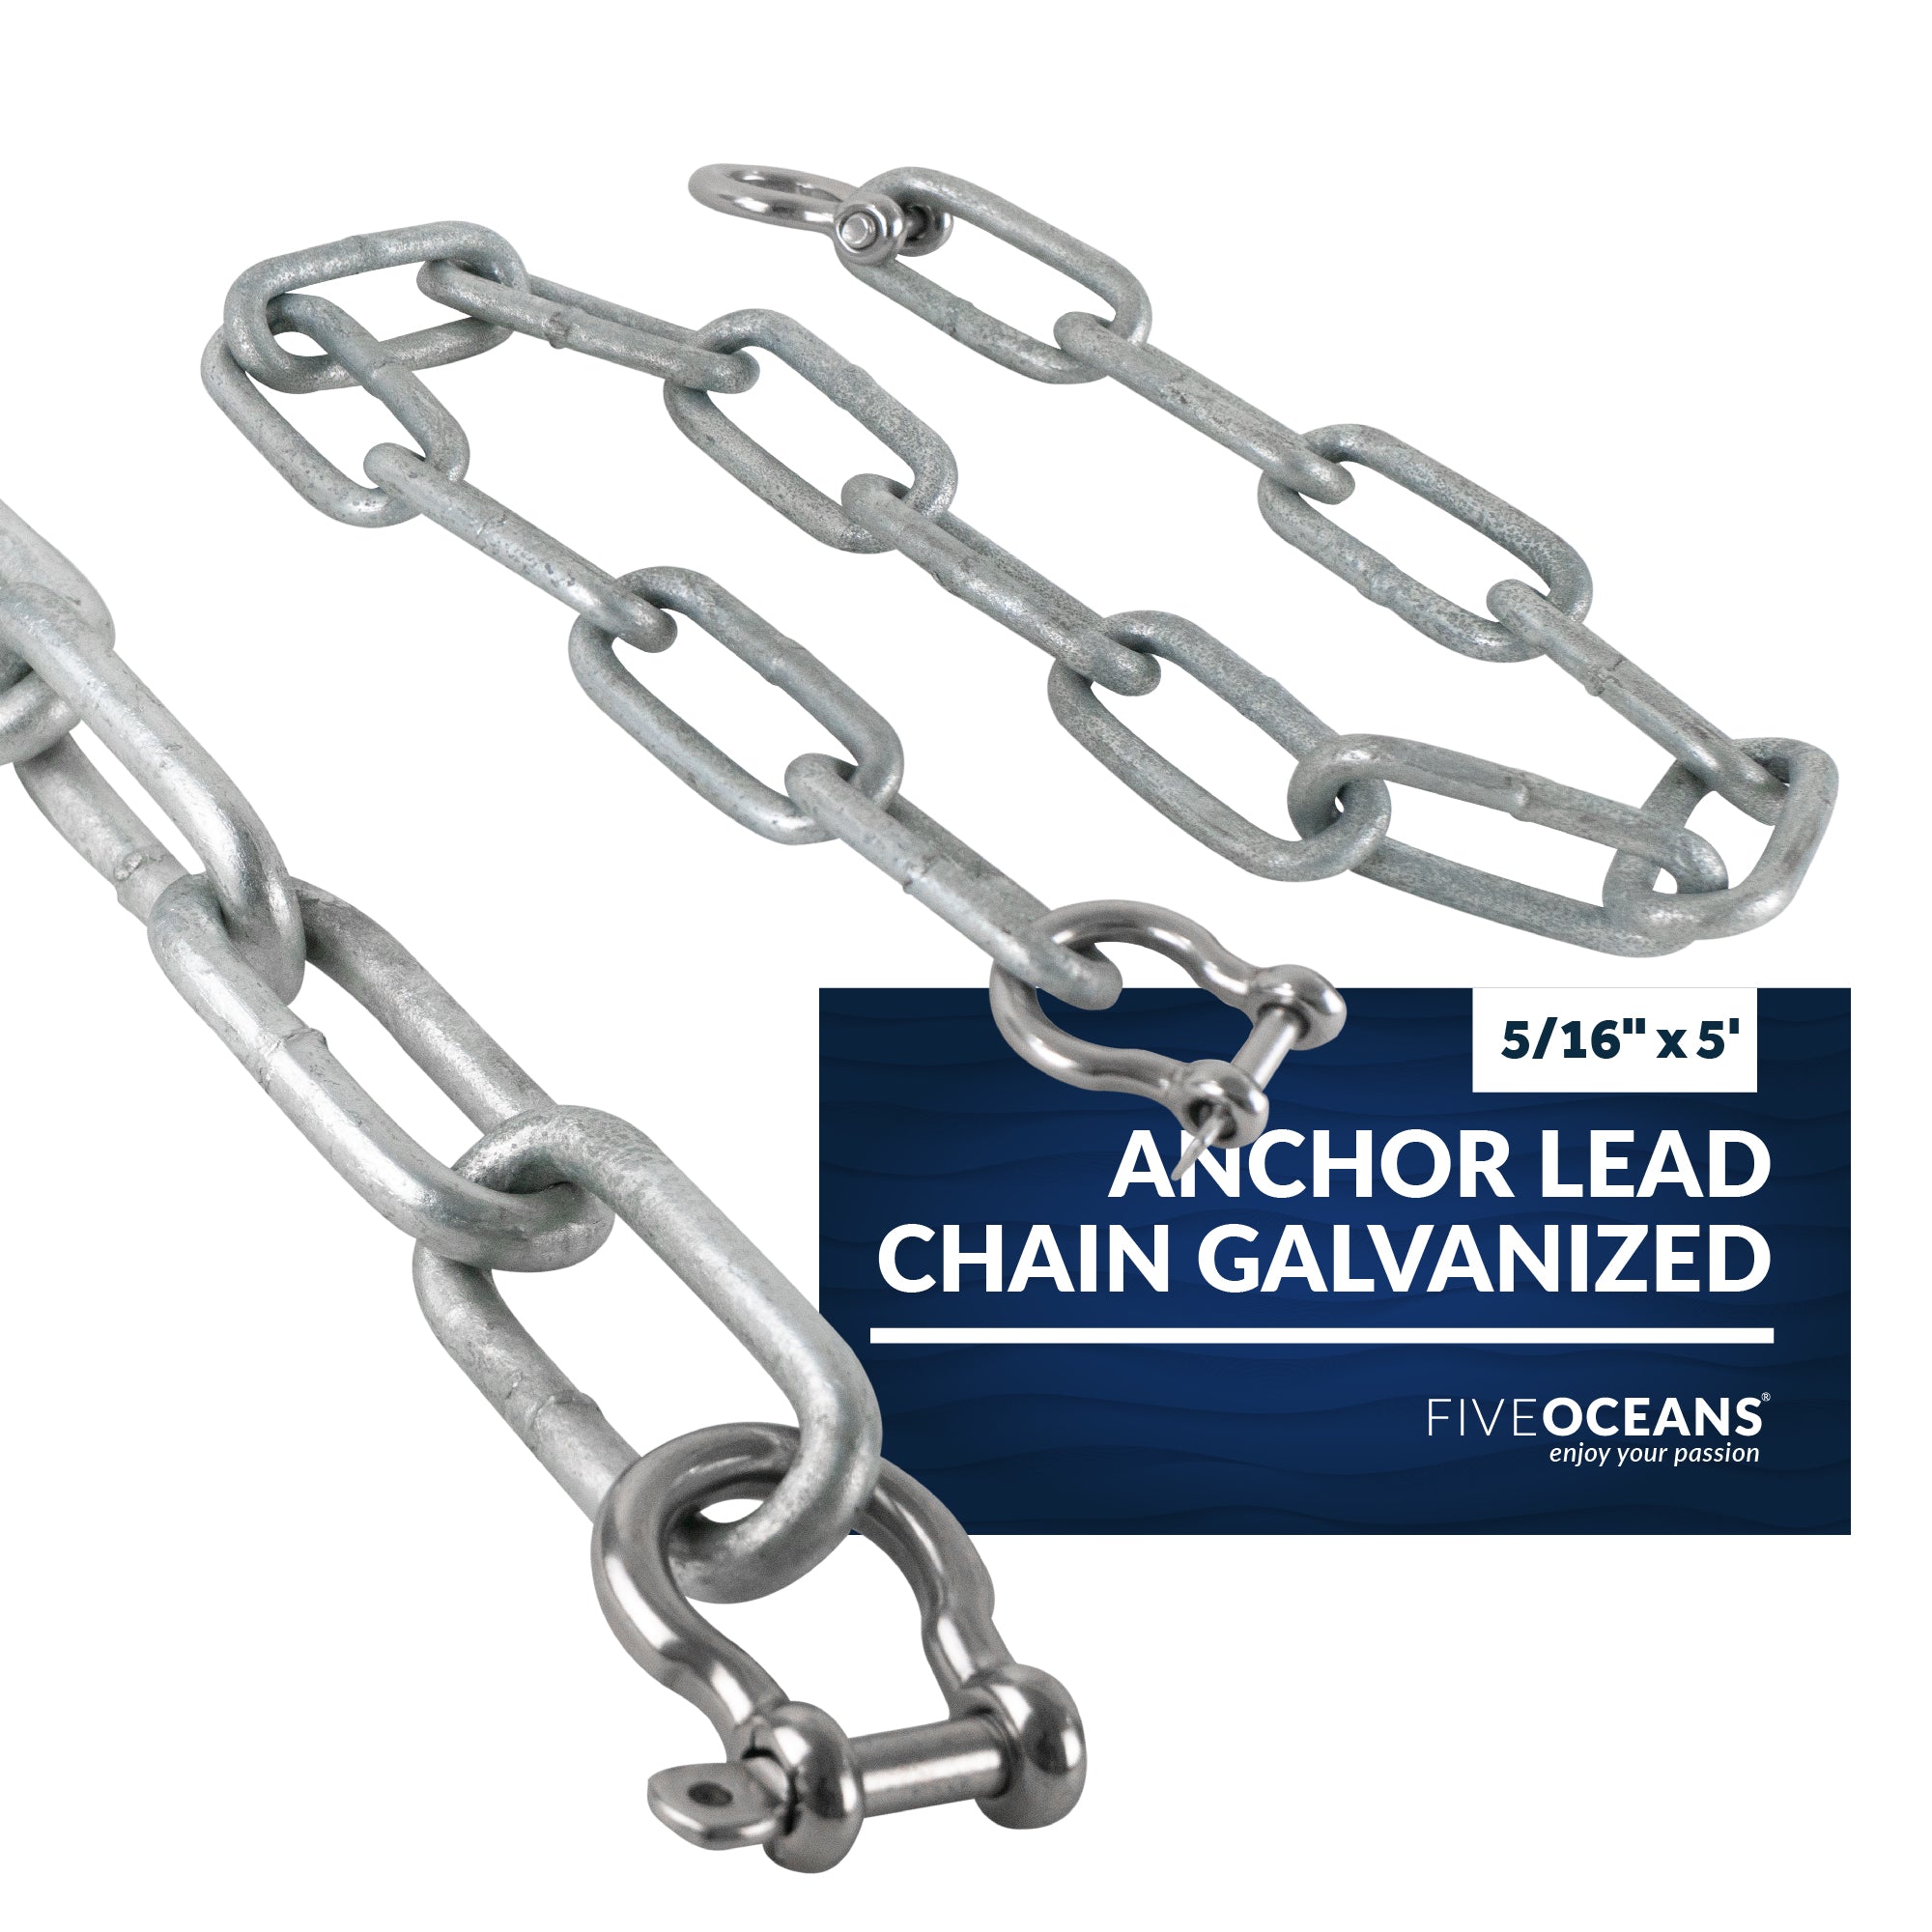 Boat Anchor Lead Chain with Shackles, 5/16 inches x 5 Feet Hot-Dipped Galvanized Steel with 2 AISI316 Stainless Steel 5/16 inches Bow Shackles FO4569-GN5